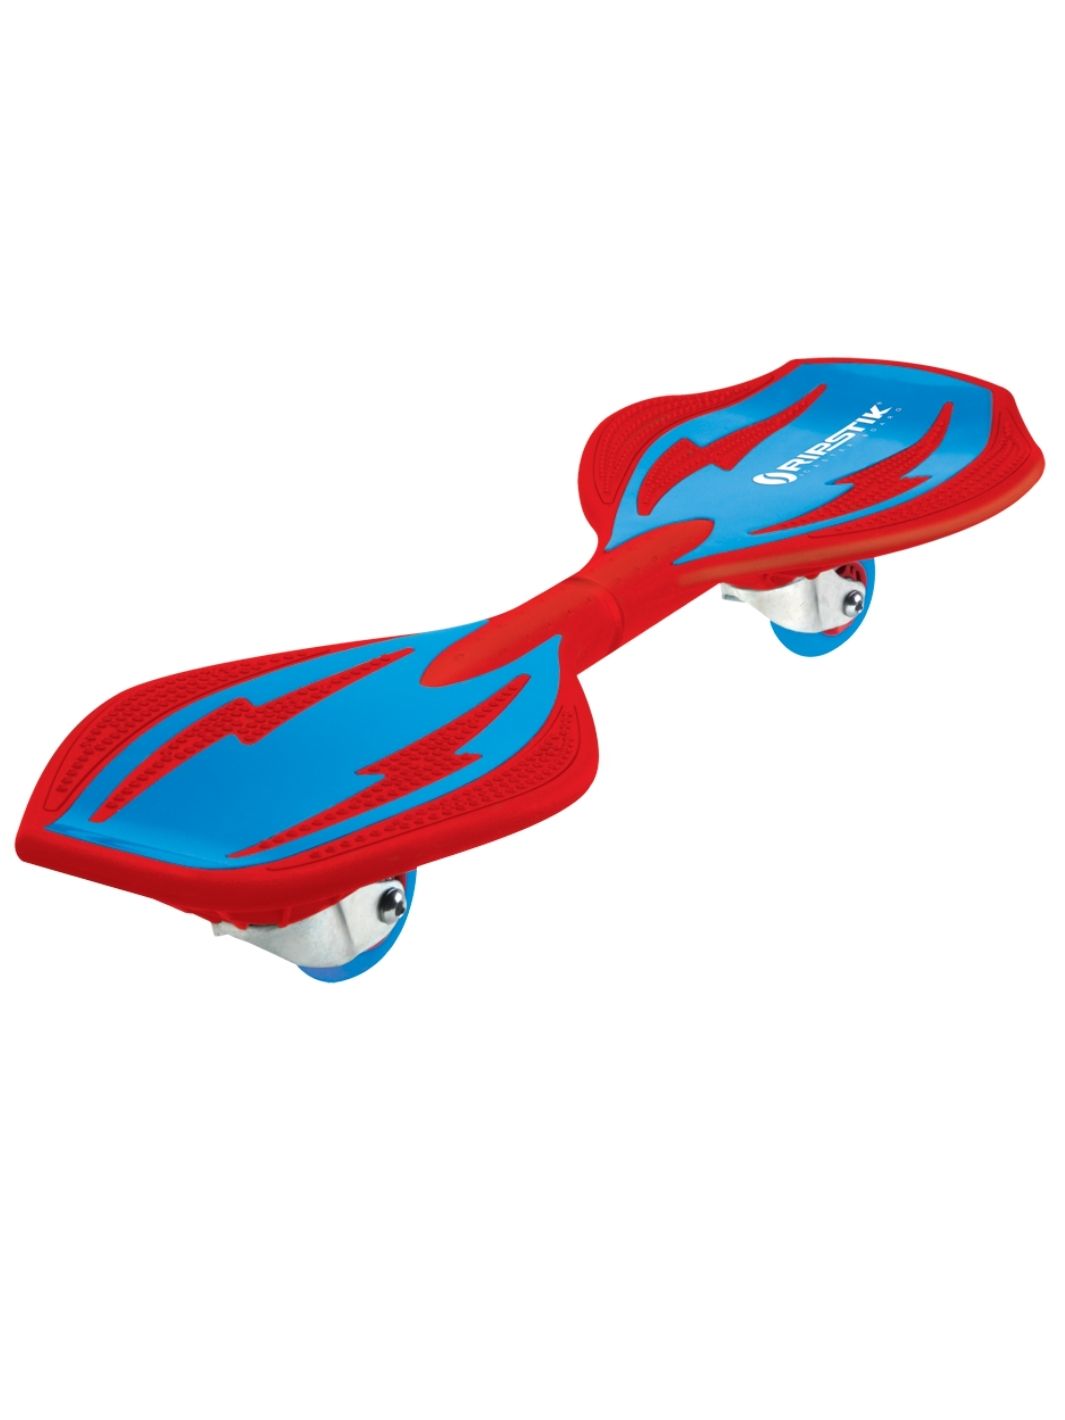 RipStik Ripster Brights - Red/Blue